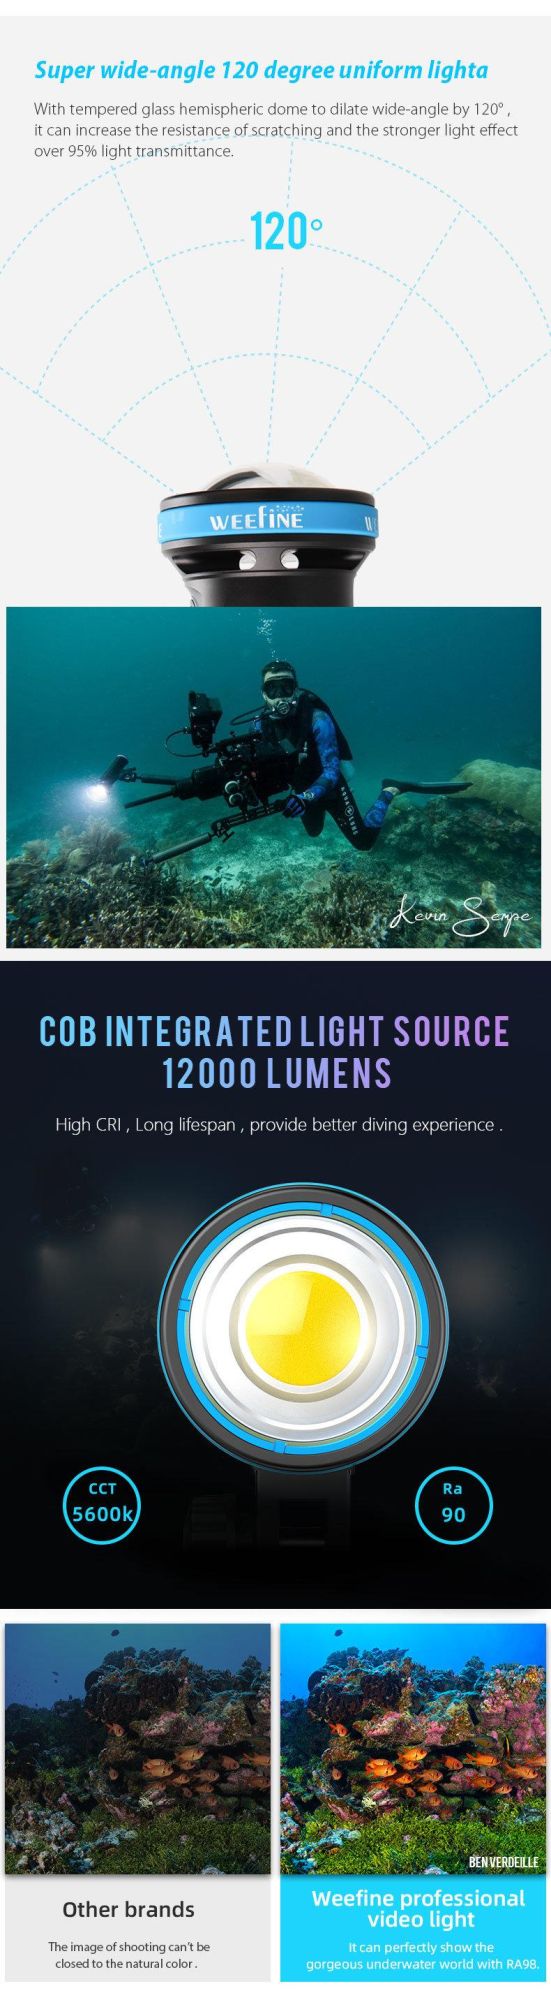 Photography Underwater Flashlight with Patent Design Battery Level Color Indicator